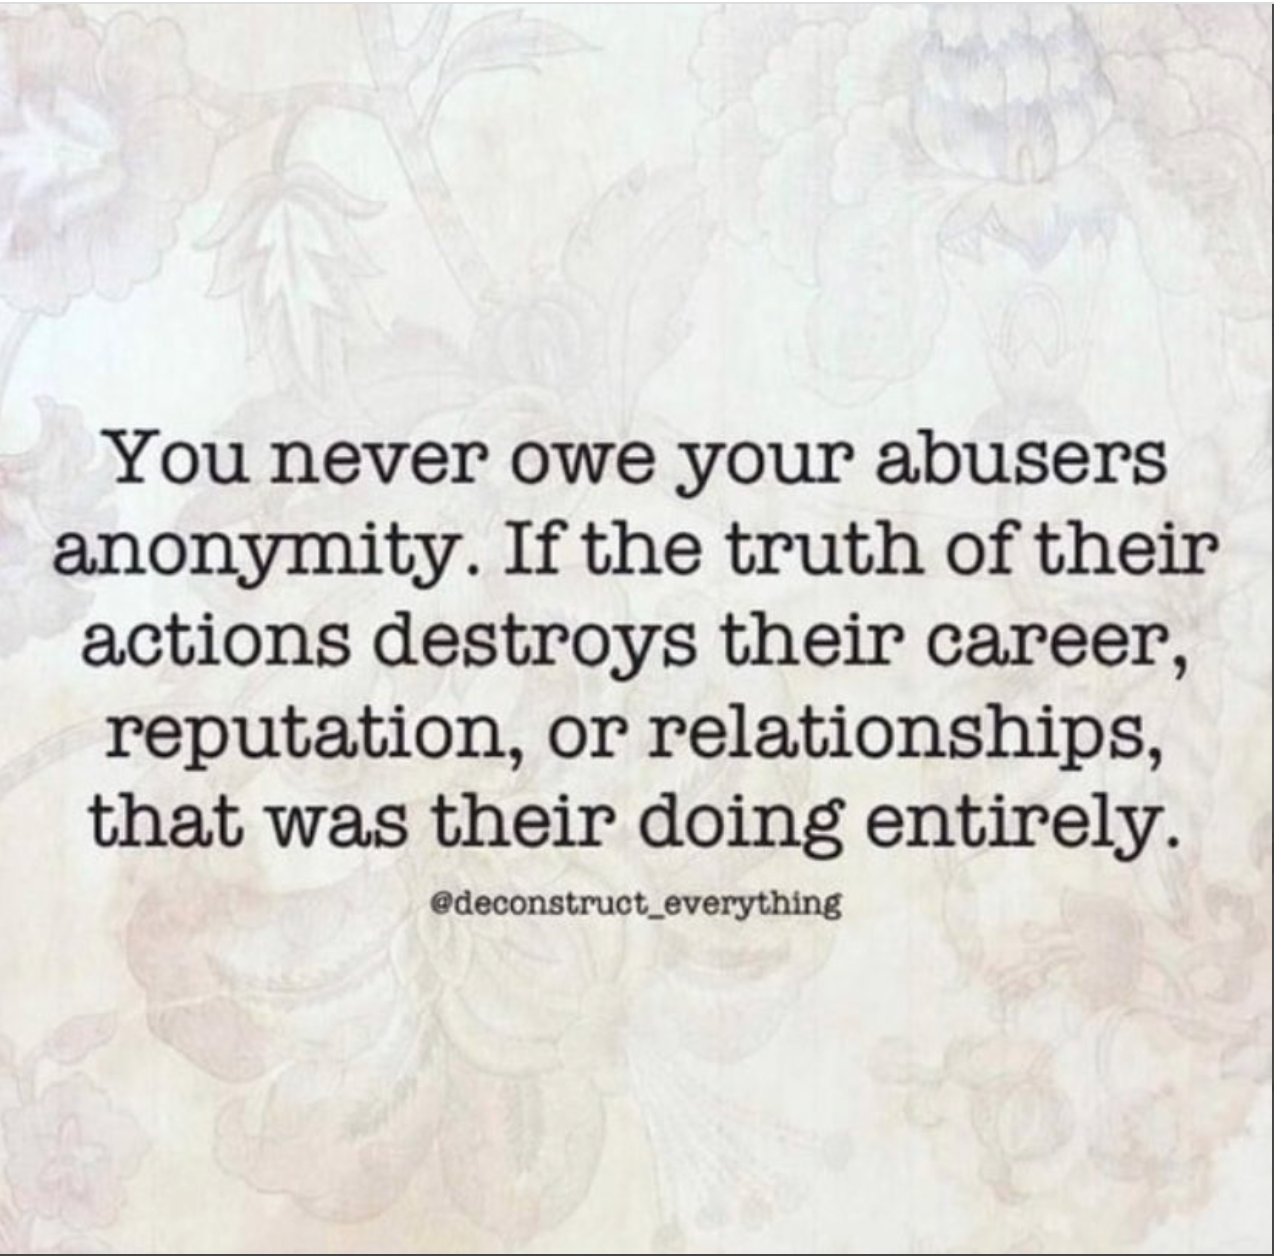 Note about abusers